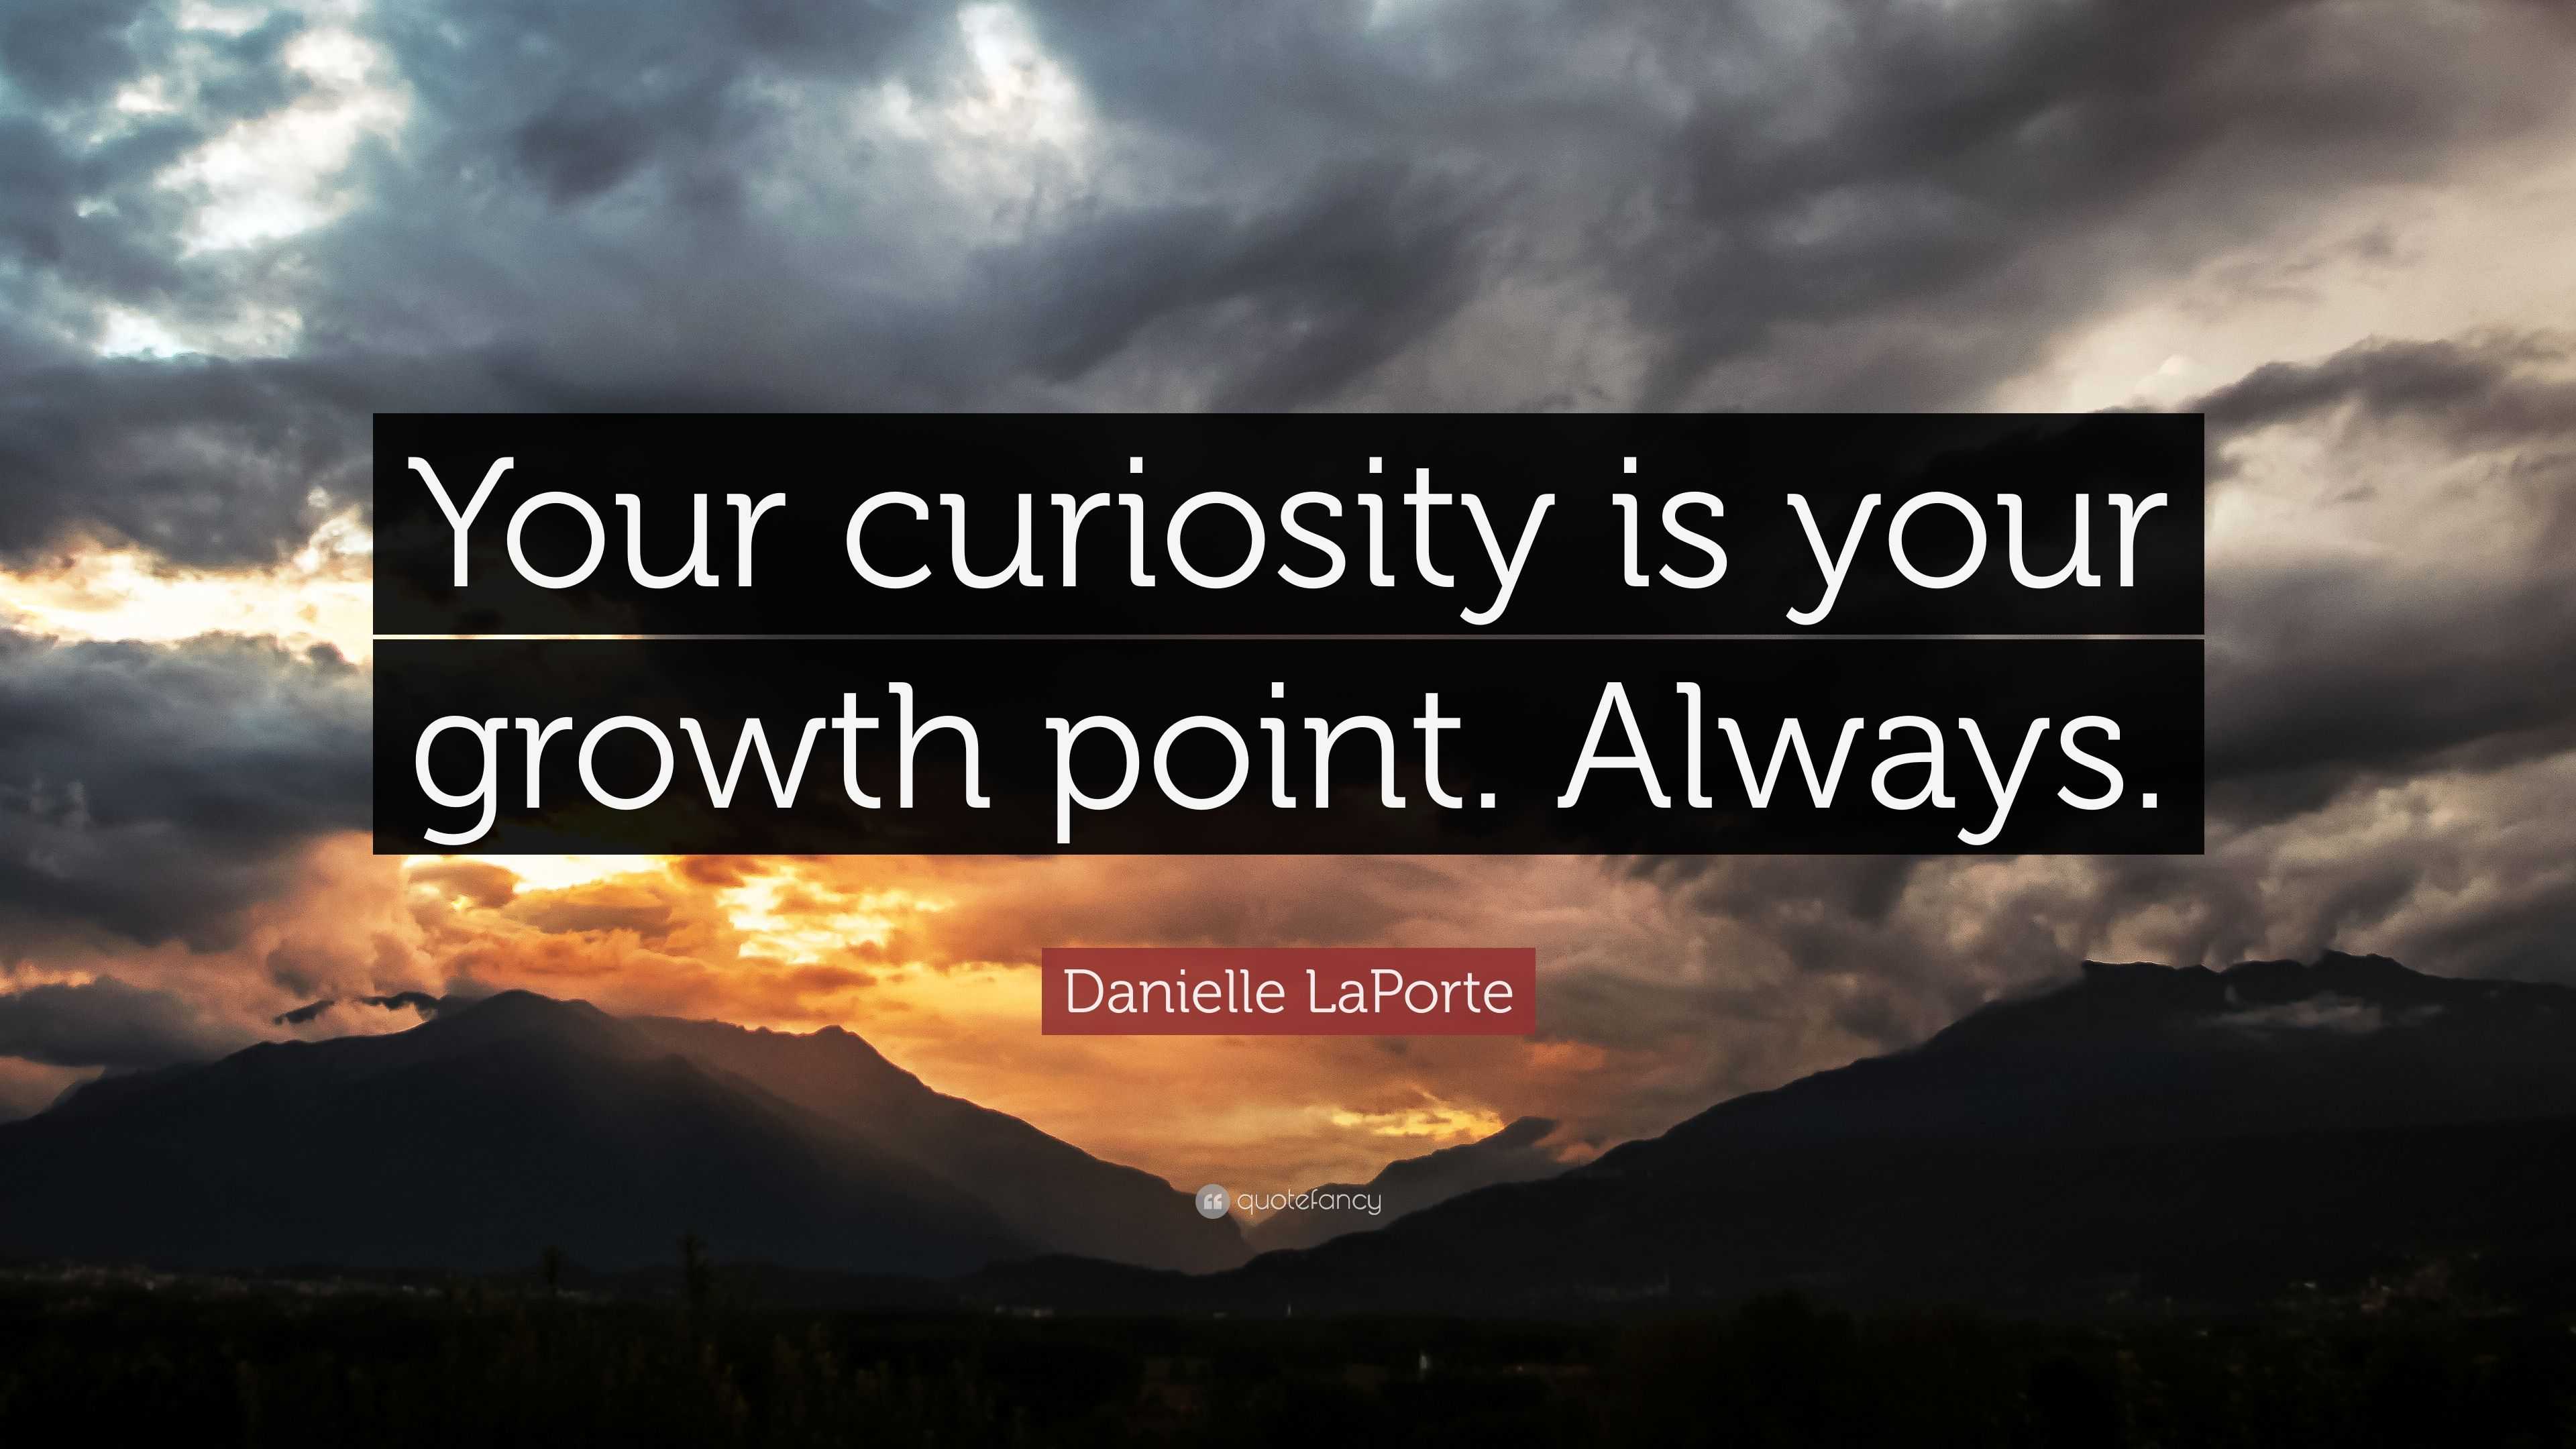 Danielle LaPorte Quote: “Your curiosity is your growth point. Always